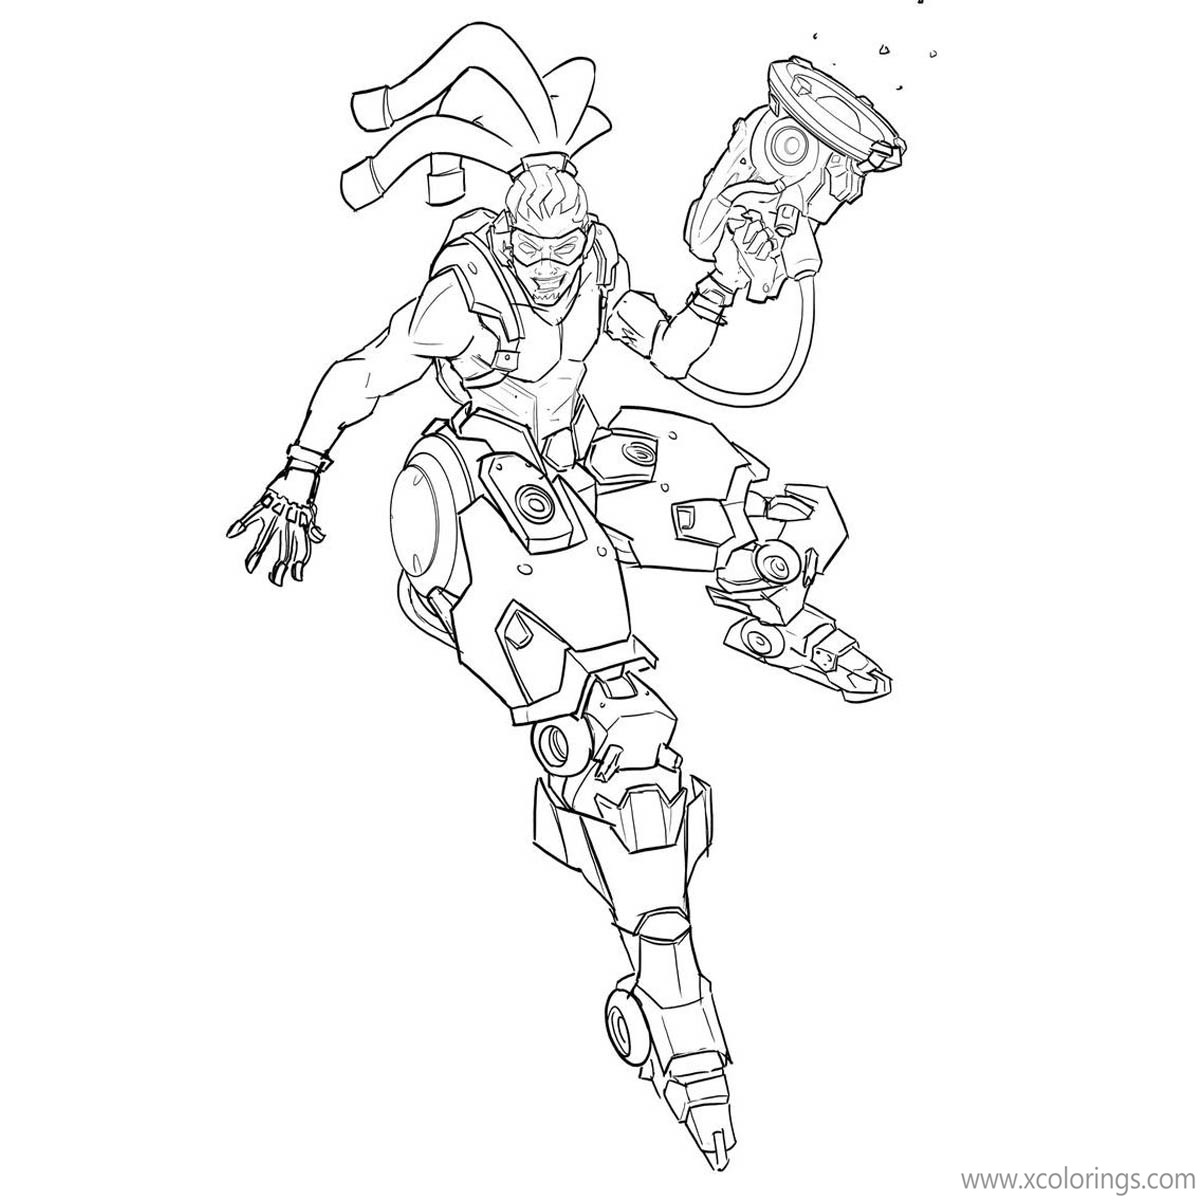 Free Overwatch Coloring Pages Lucio with Sonic Amplifier printable